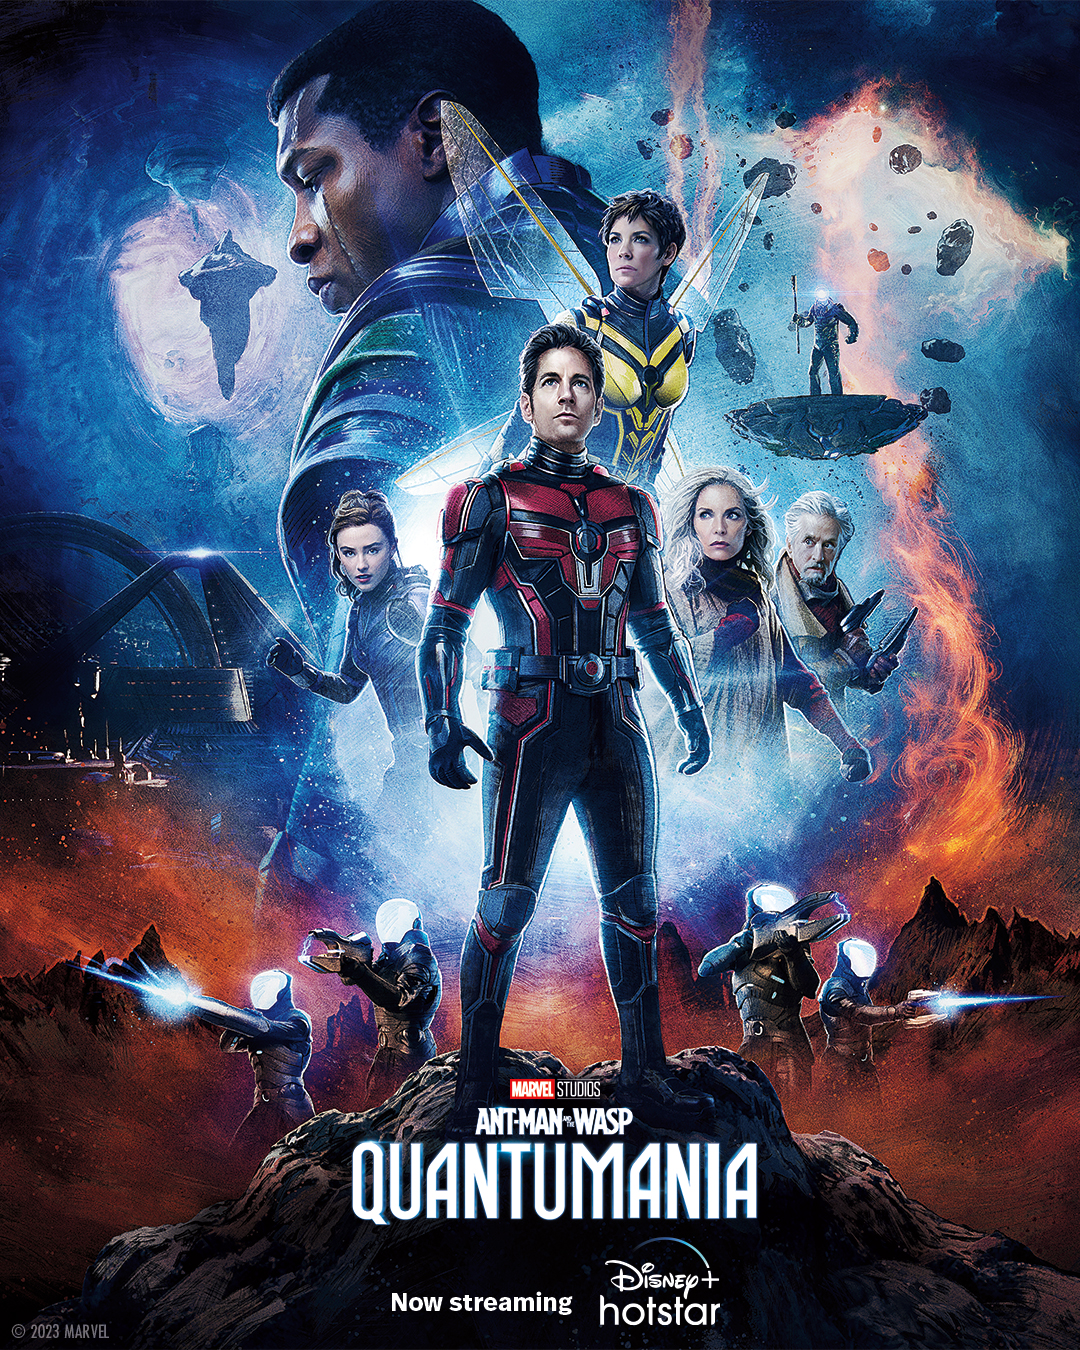 Ant-Man and The Wasp: Quantumania - Disney+ Hotstar